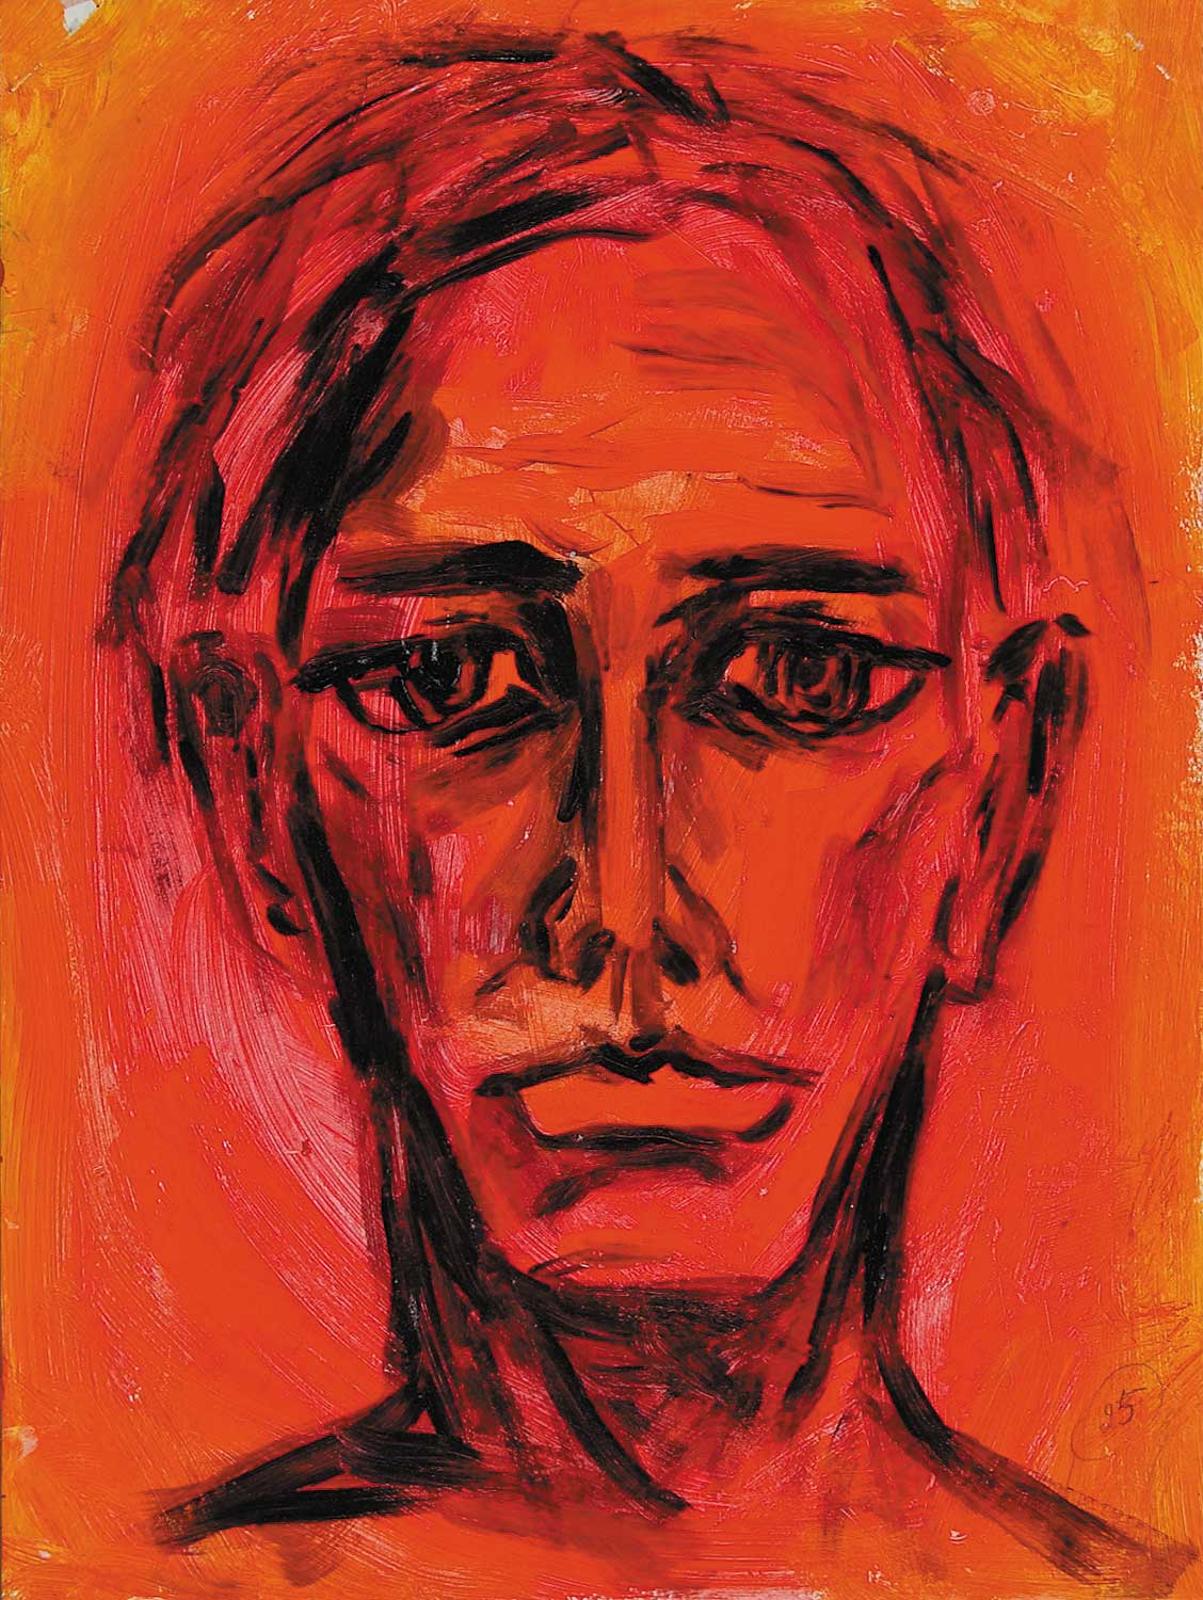 Robert Charles Aller (1922-2008) - Untitled - Self Portrait with Pink and Red Background II